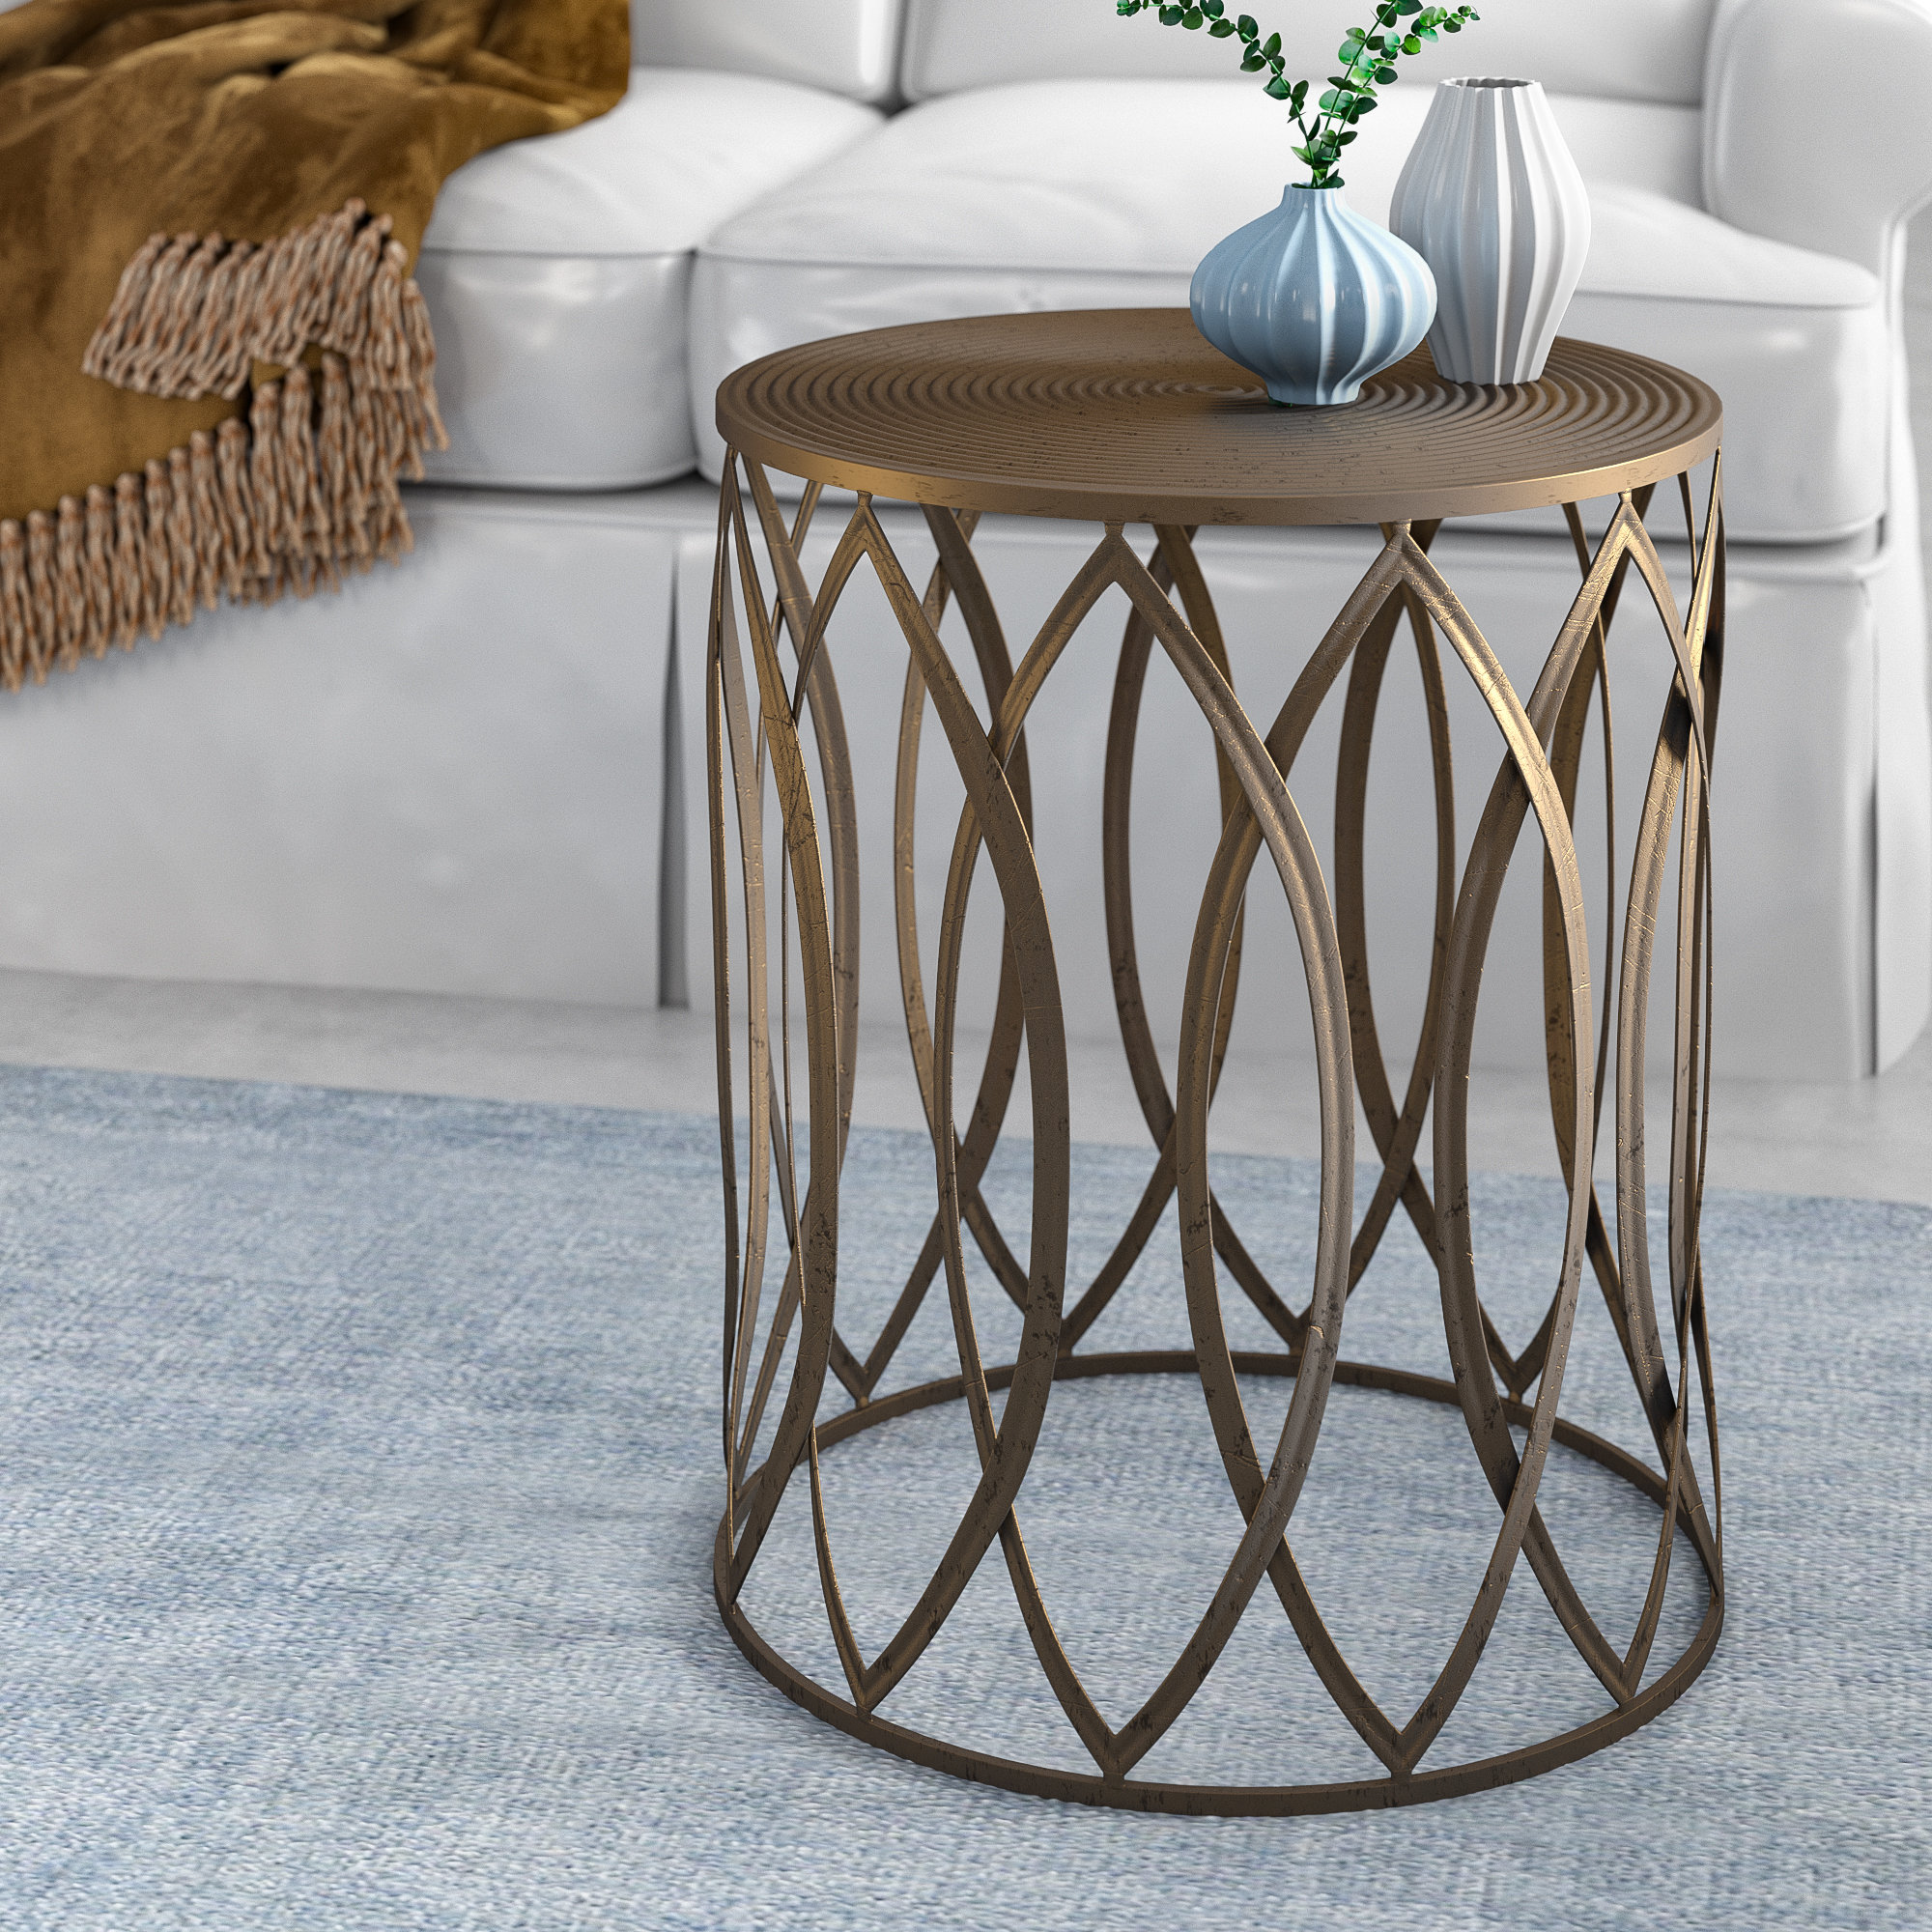 pie shaped end table stanley solar metal accent target windham furniture winsome with drawer diy square coffee green mcm side barrel indoor mat glass agate quilted runner ideas